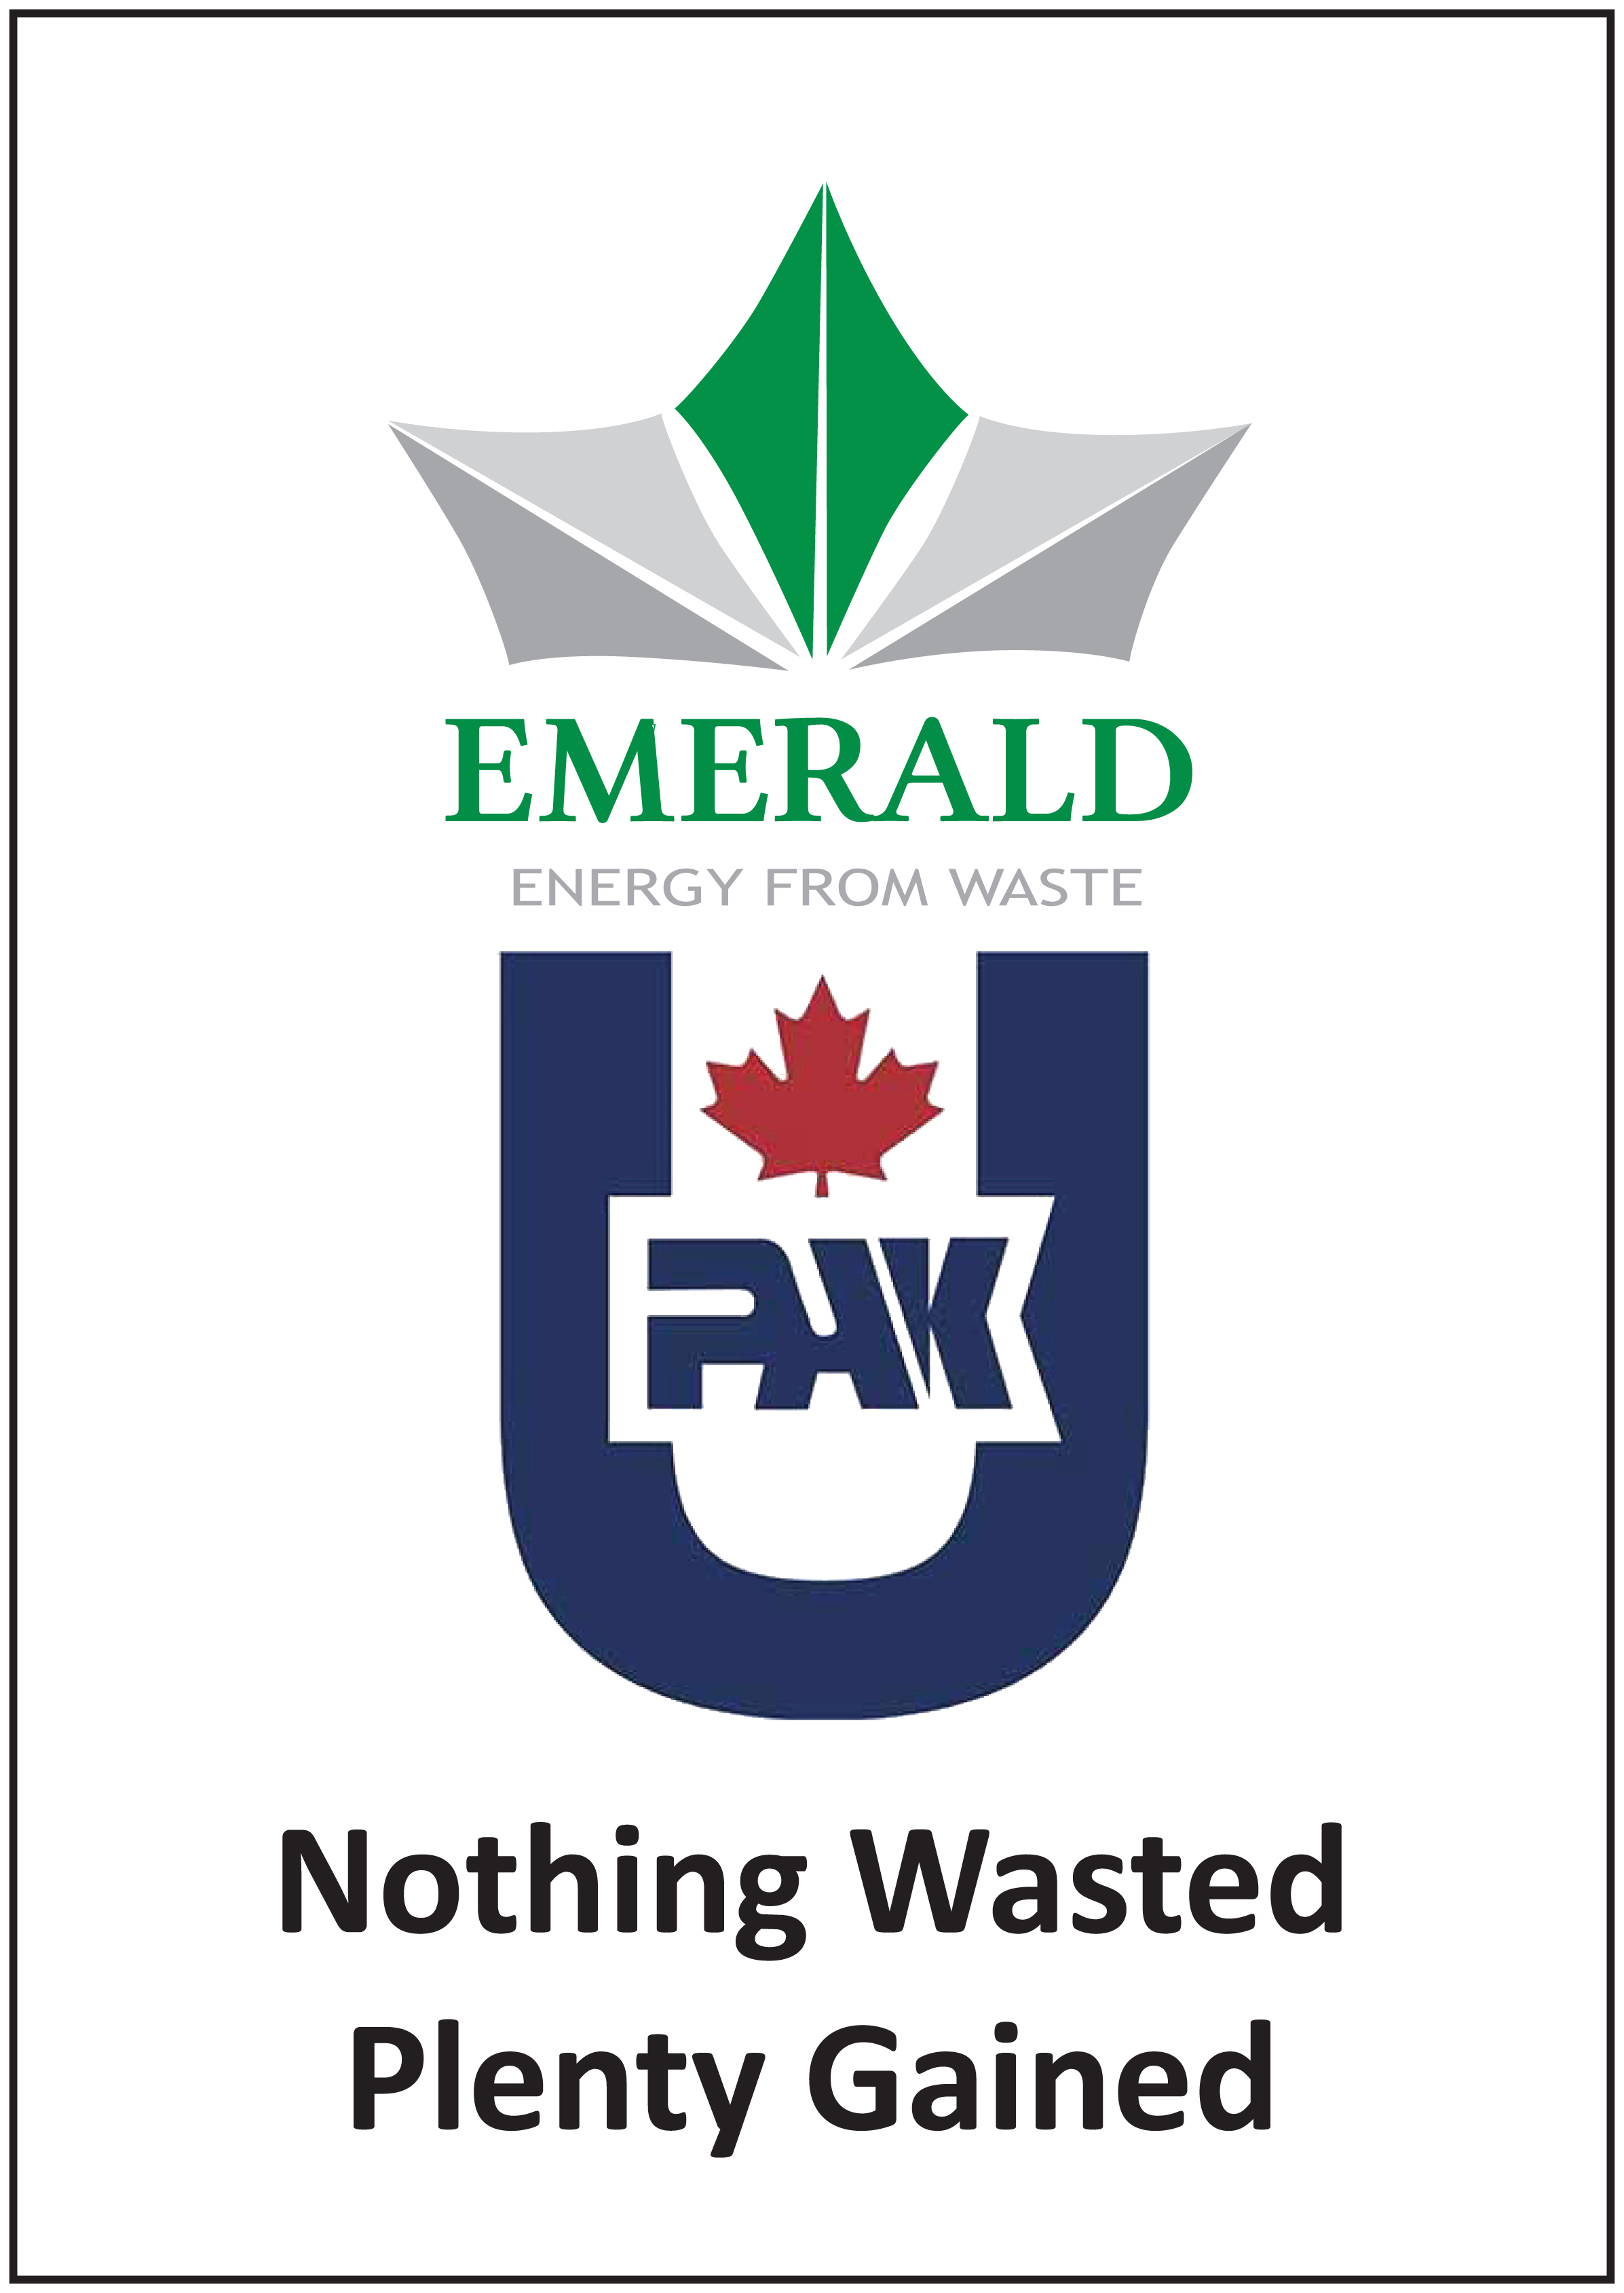 Emerald Logo with text Nothing Wasted Plenty Gained